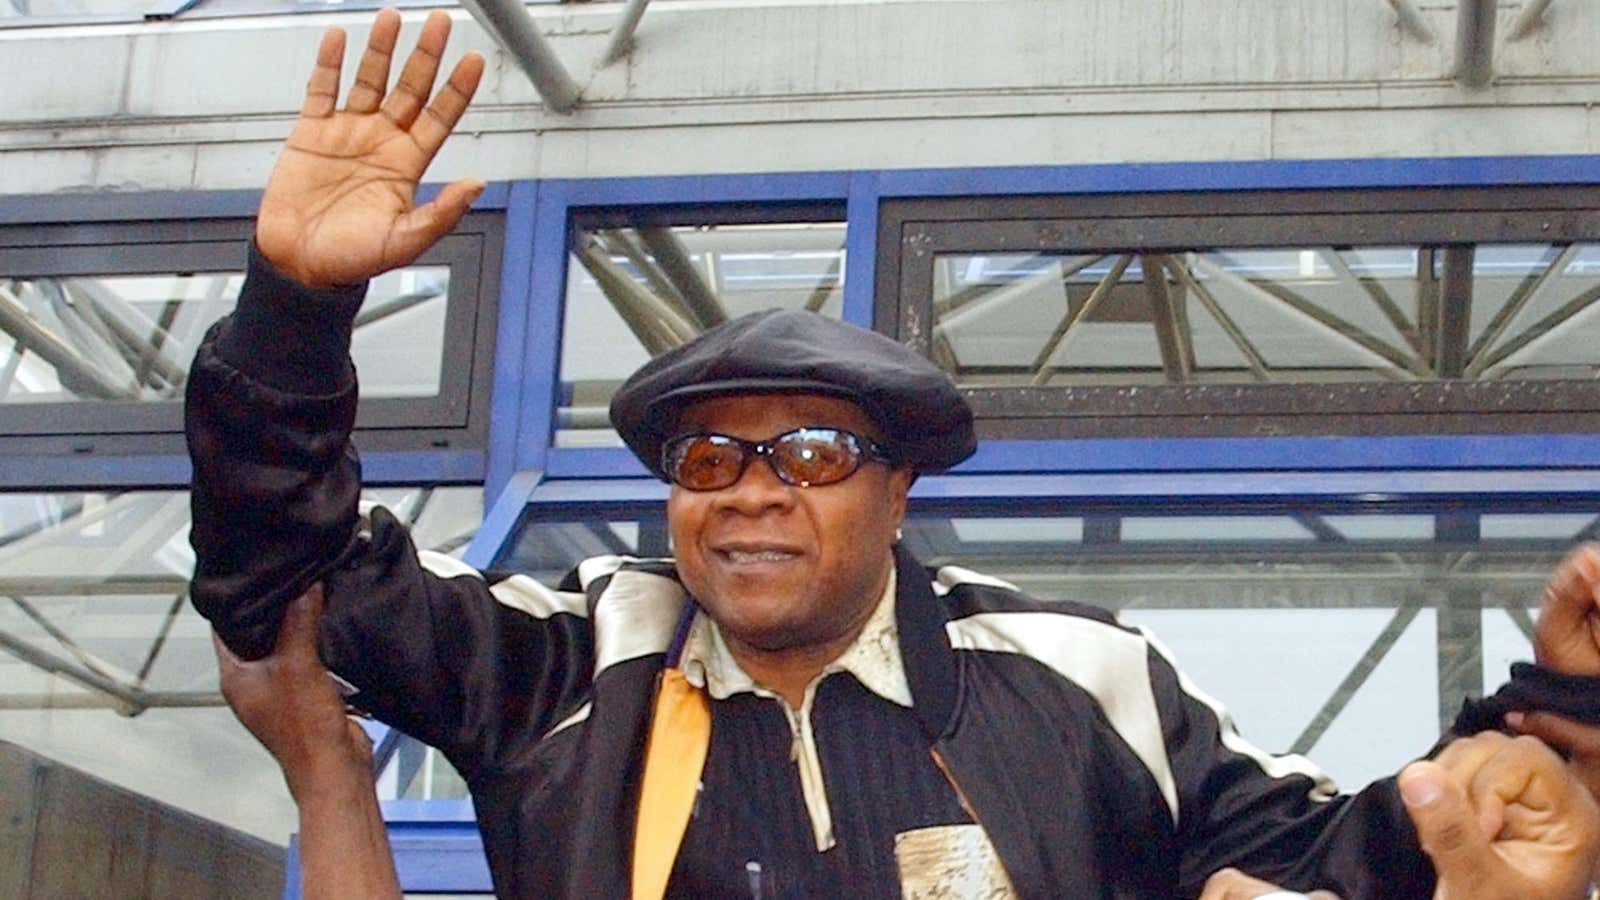 Congolese pop star Papa Wemba was popular with his supporters at home and abroad.